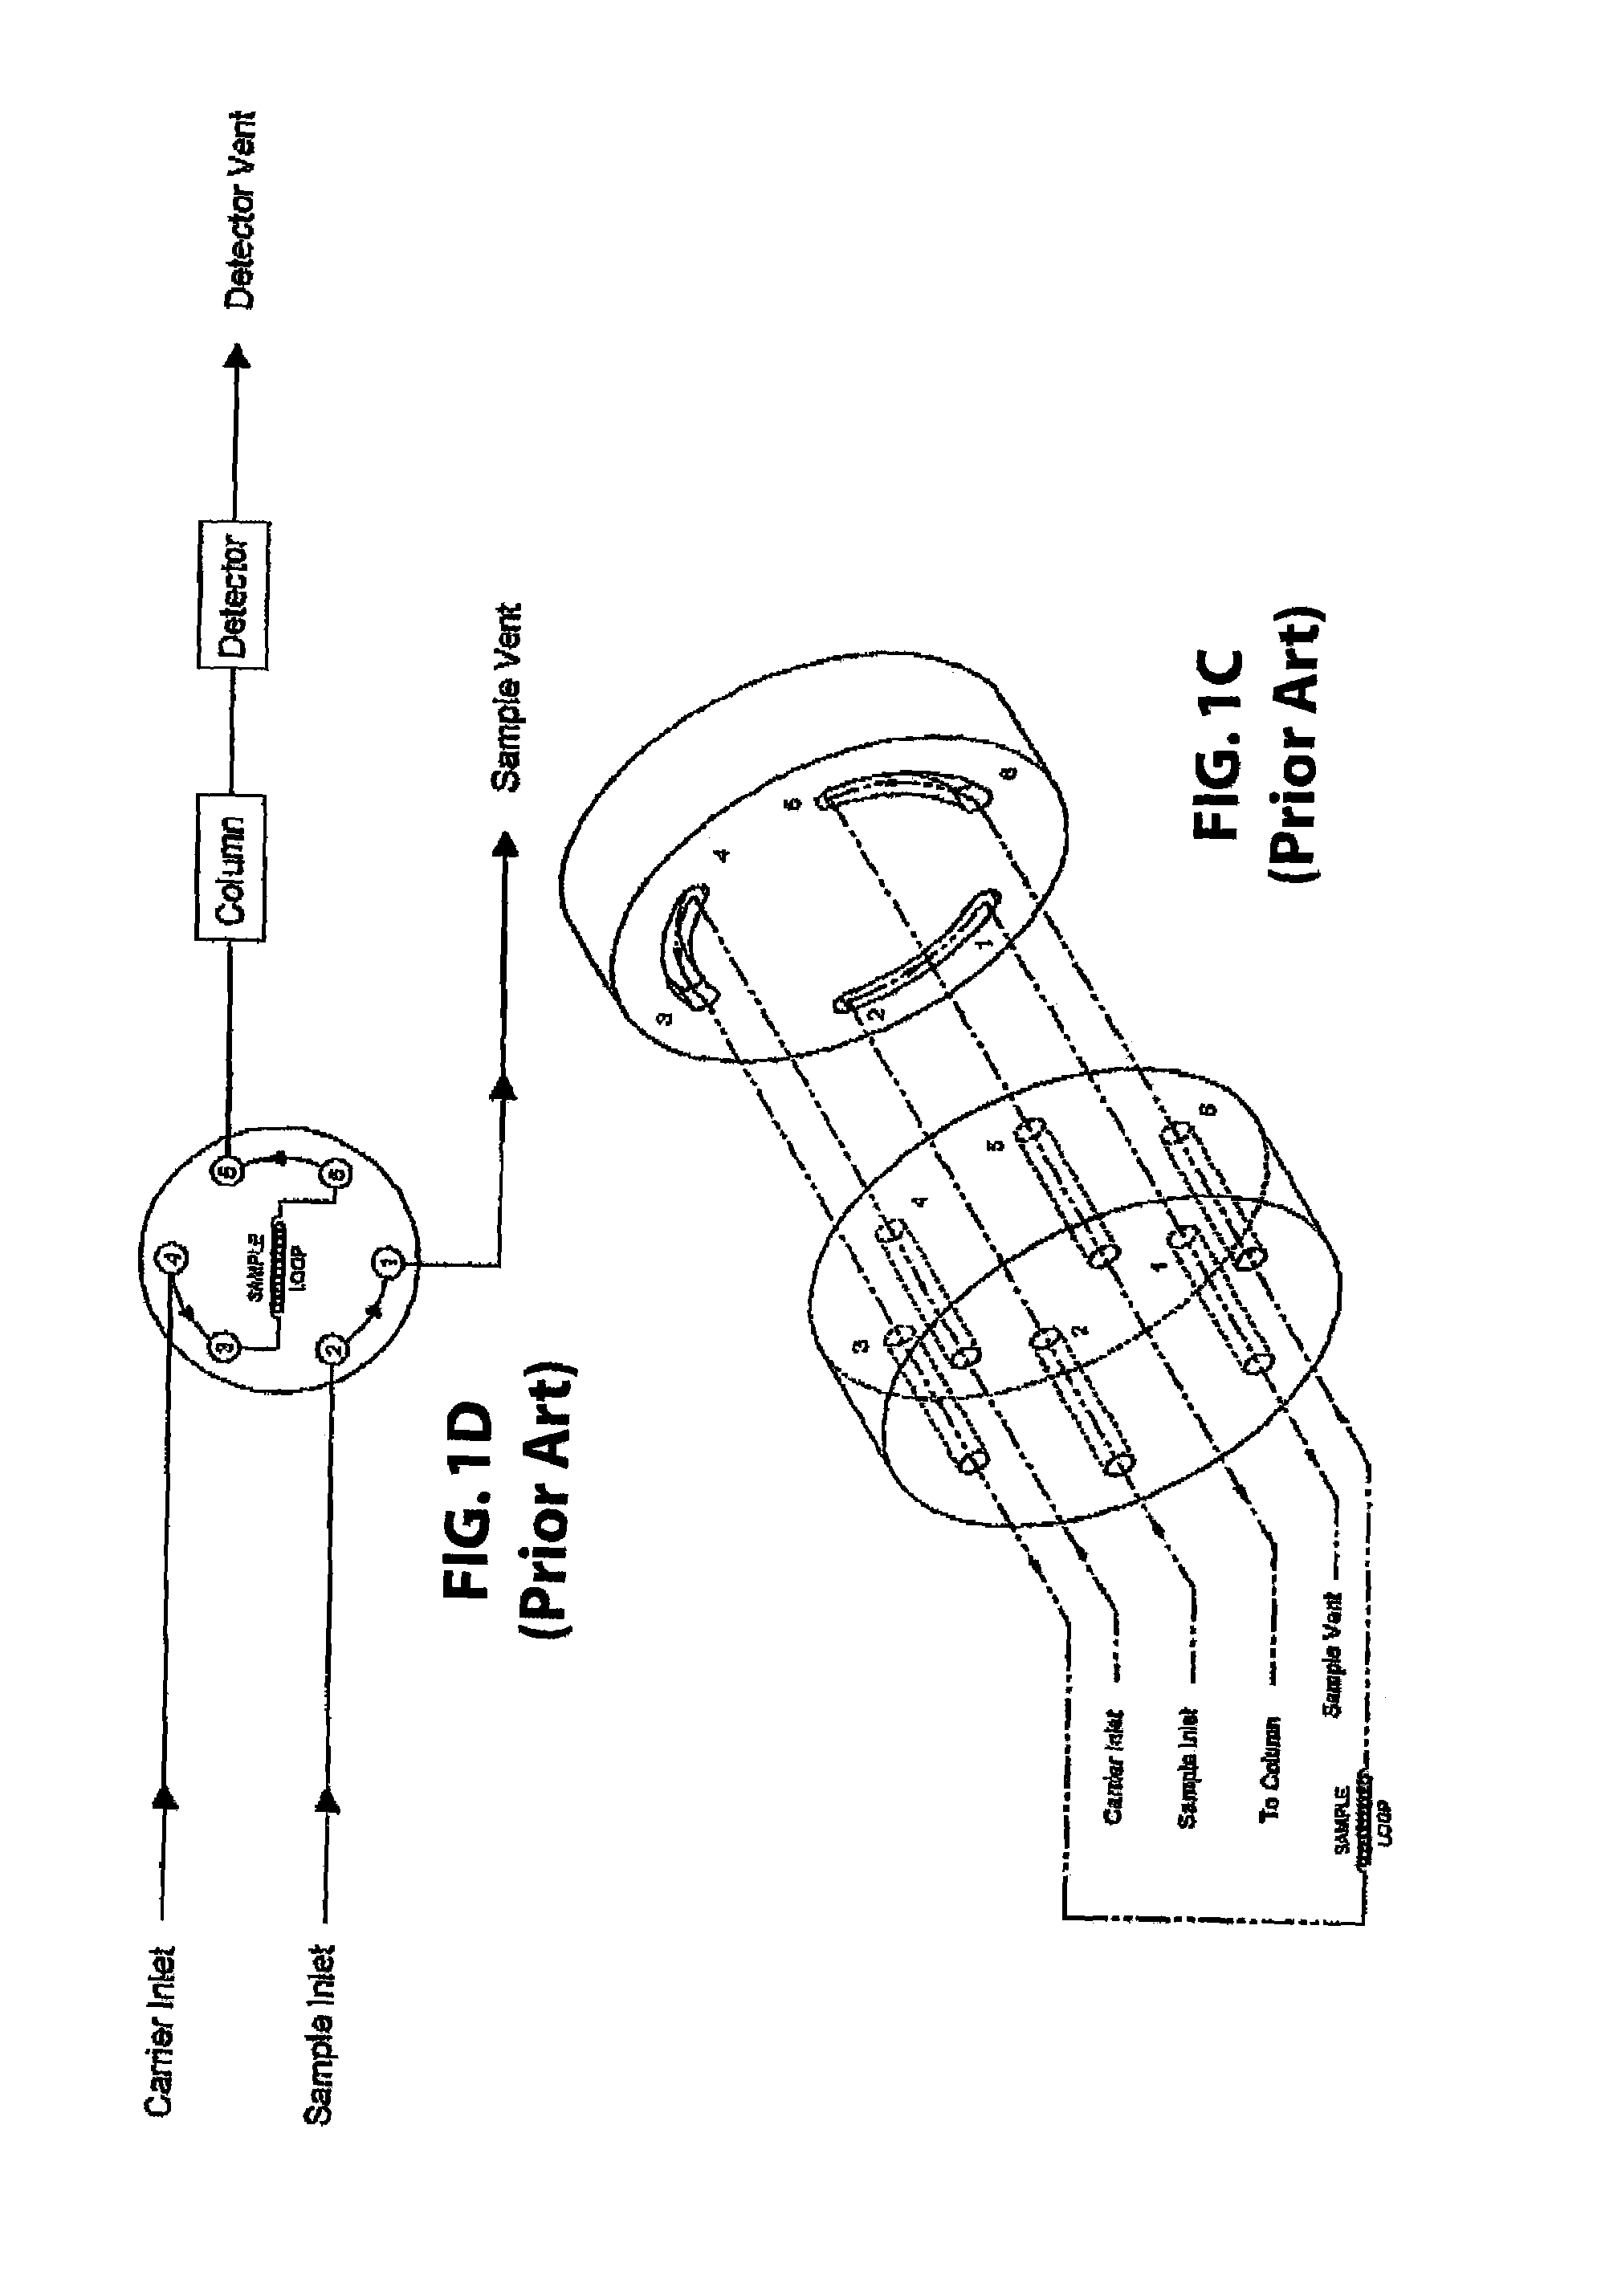 Rotary valve and analytical chromatographic system using the same